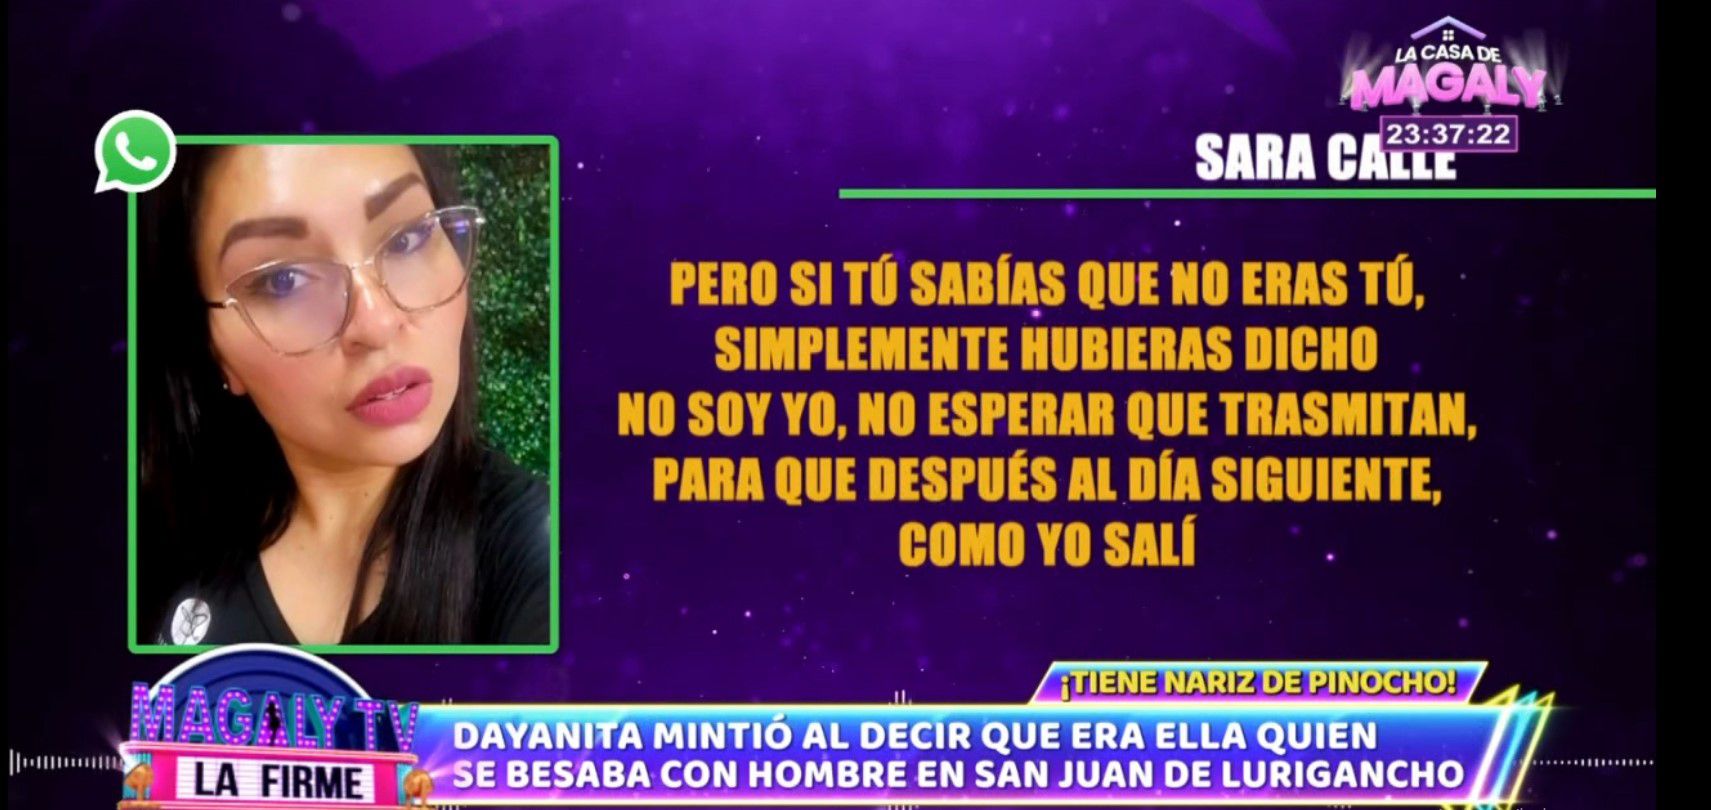 Dayanita lied when she said that it was she who kissed a man in San Juan de Lurigancho.  (Source: Magaly TV La Firme)